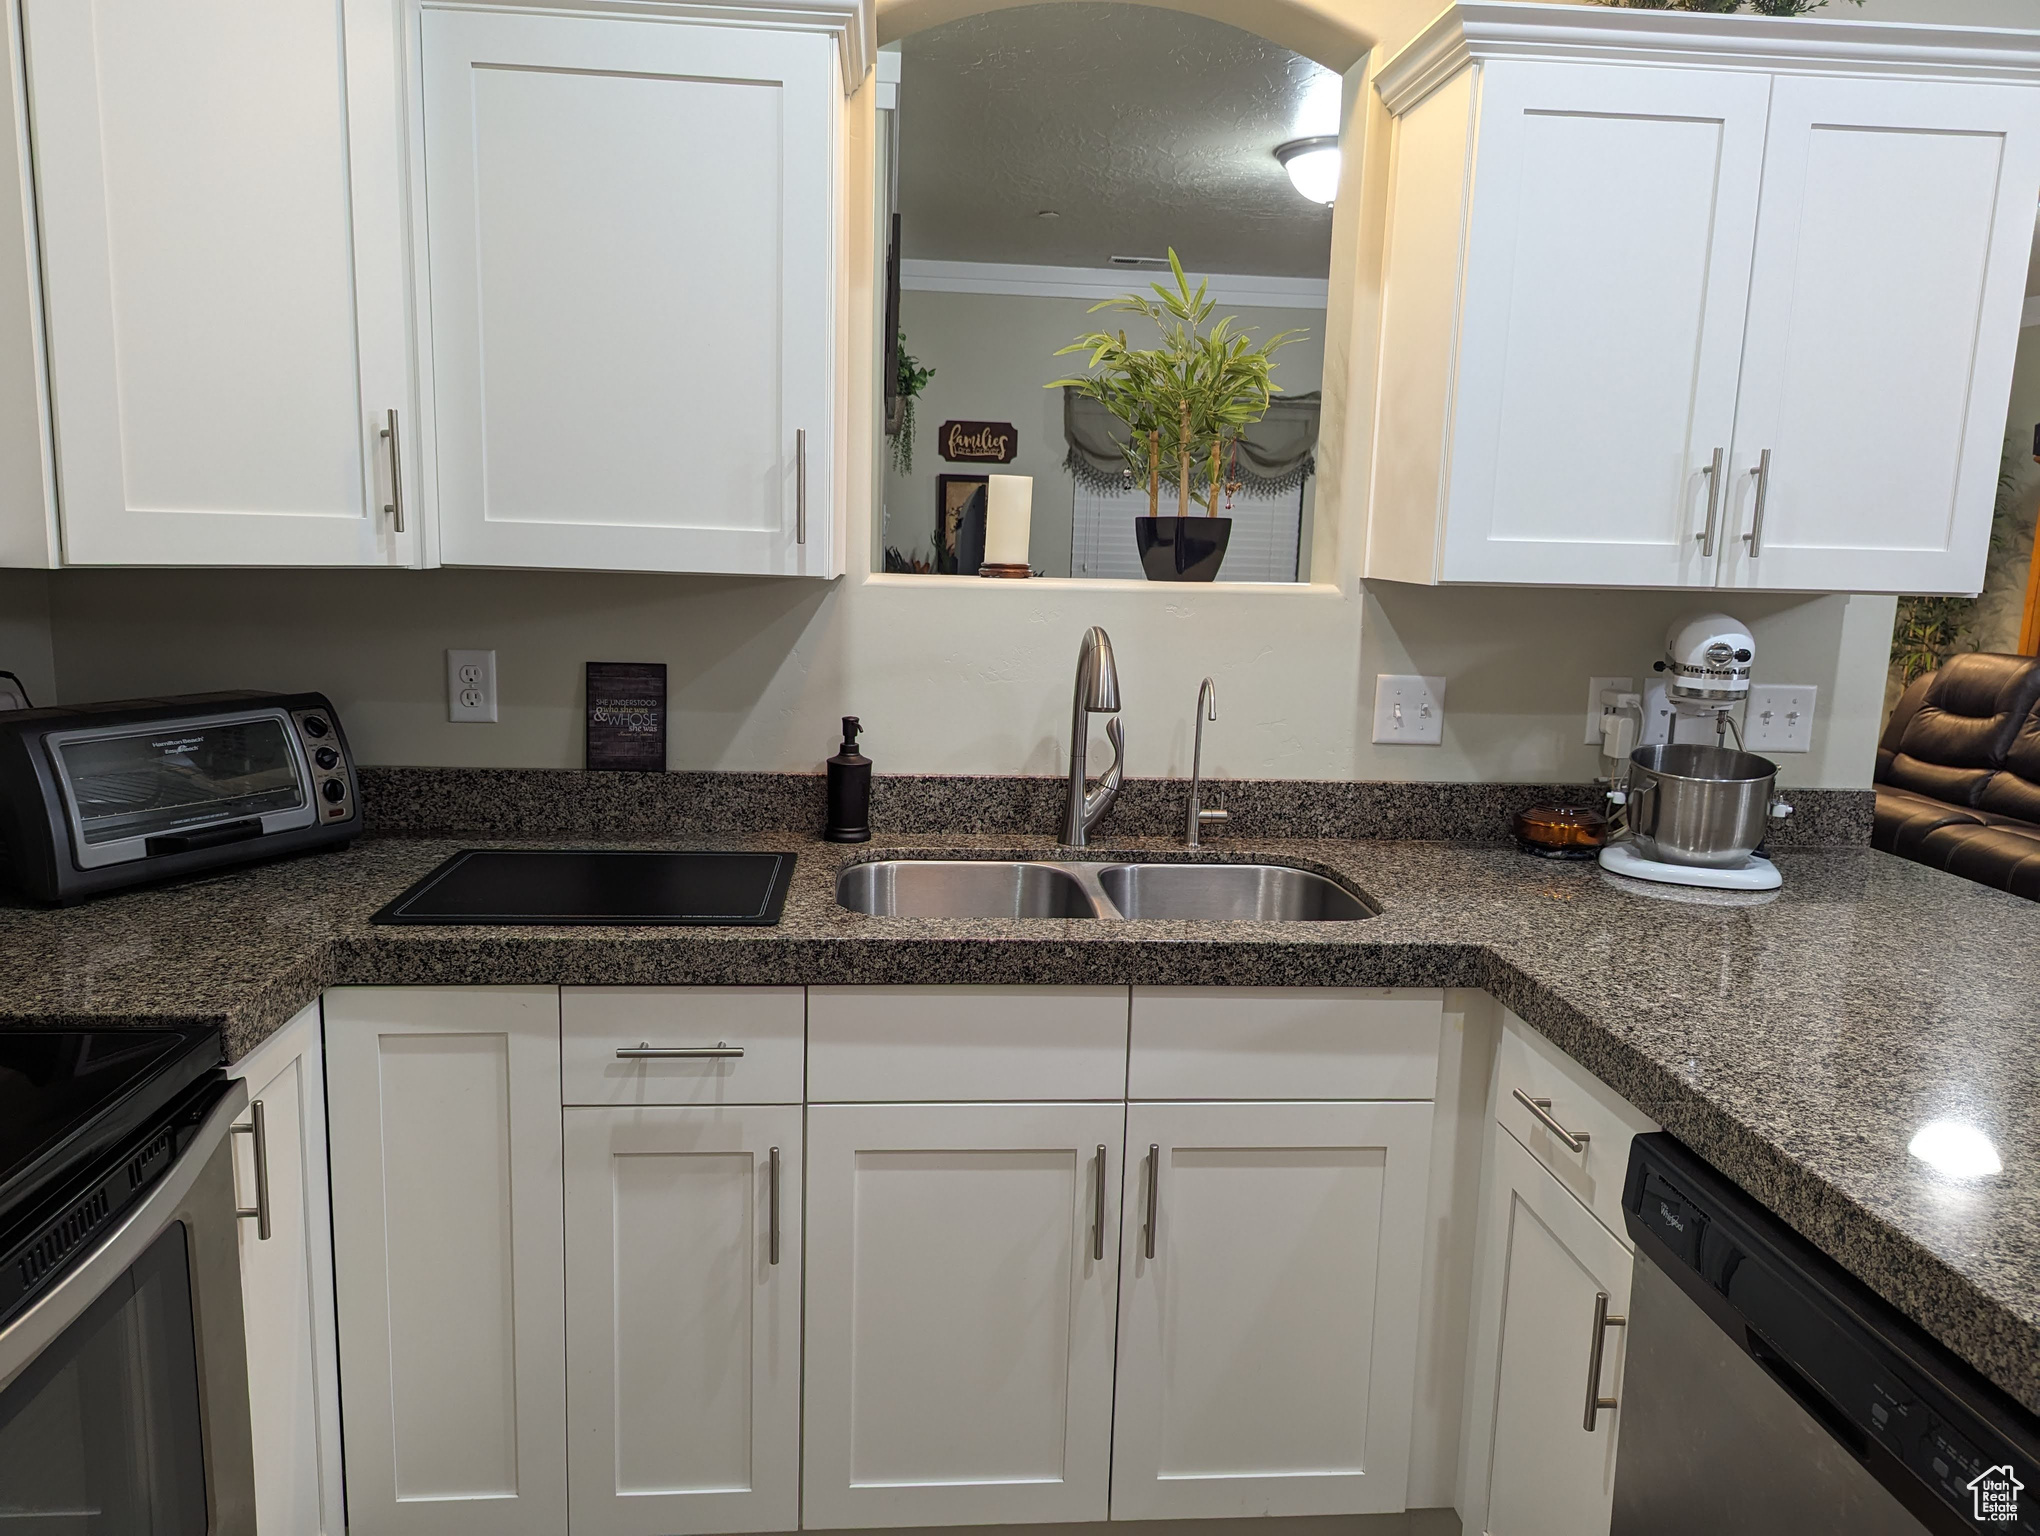 Kitchen featuring sink, white cabinetry, dishwasher, and ornamental molding